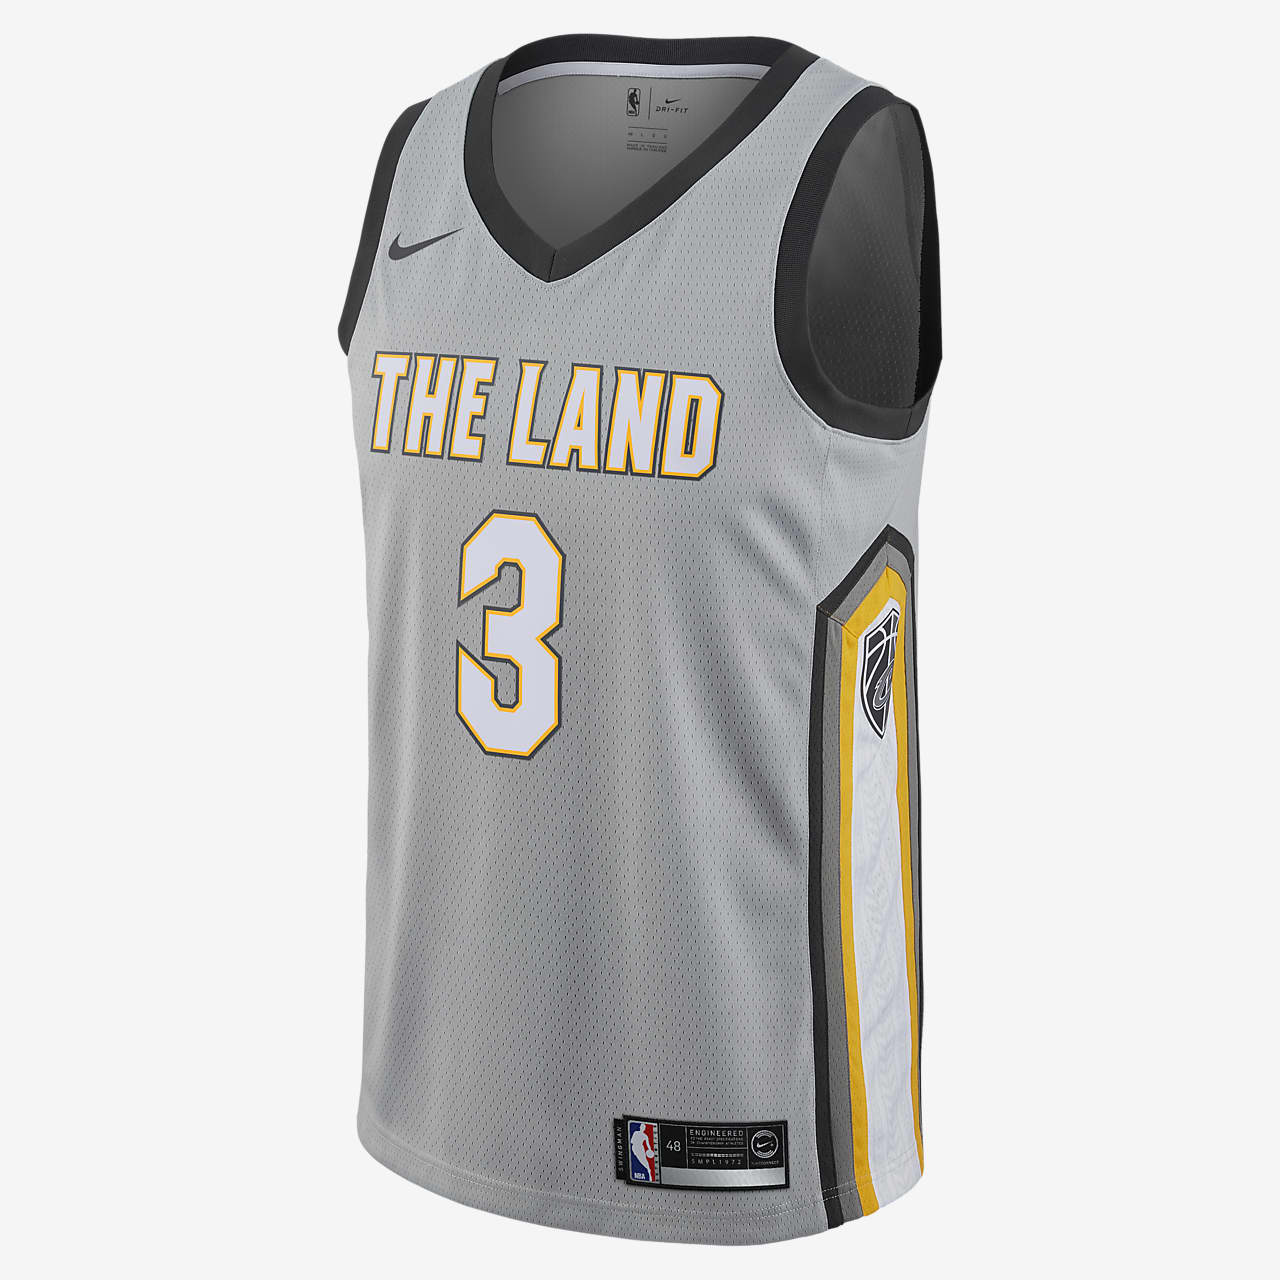 the land cleveland jersey